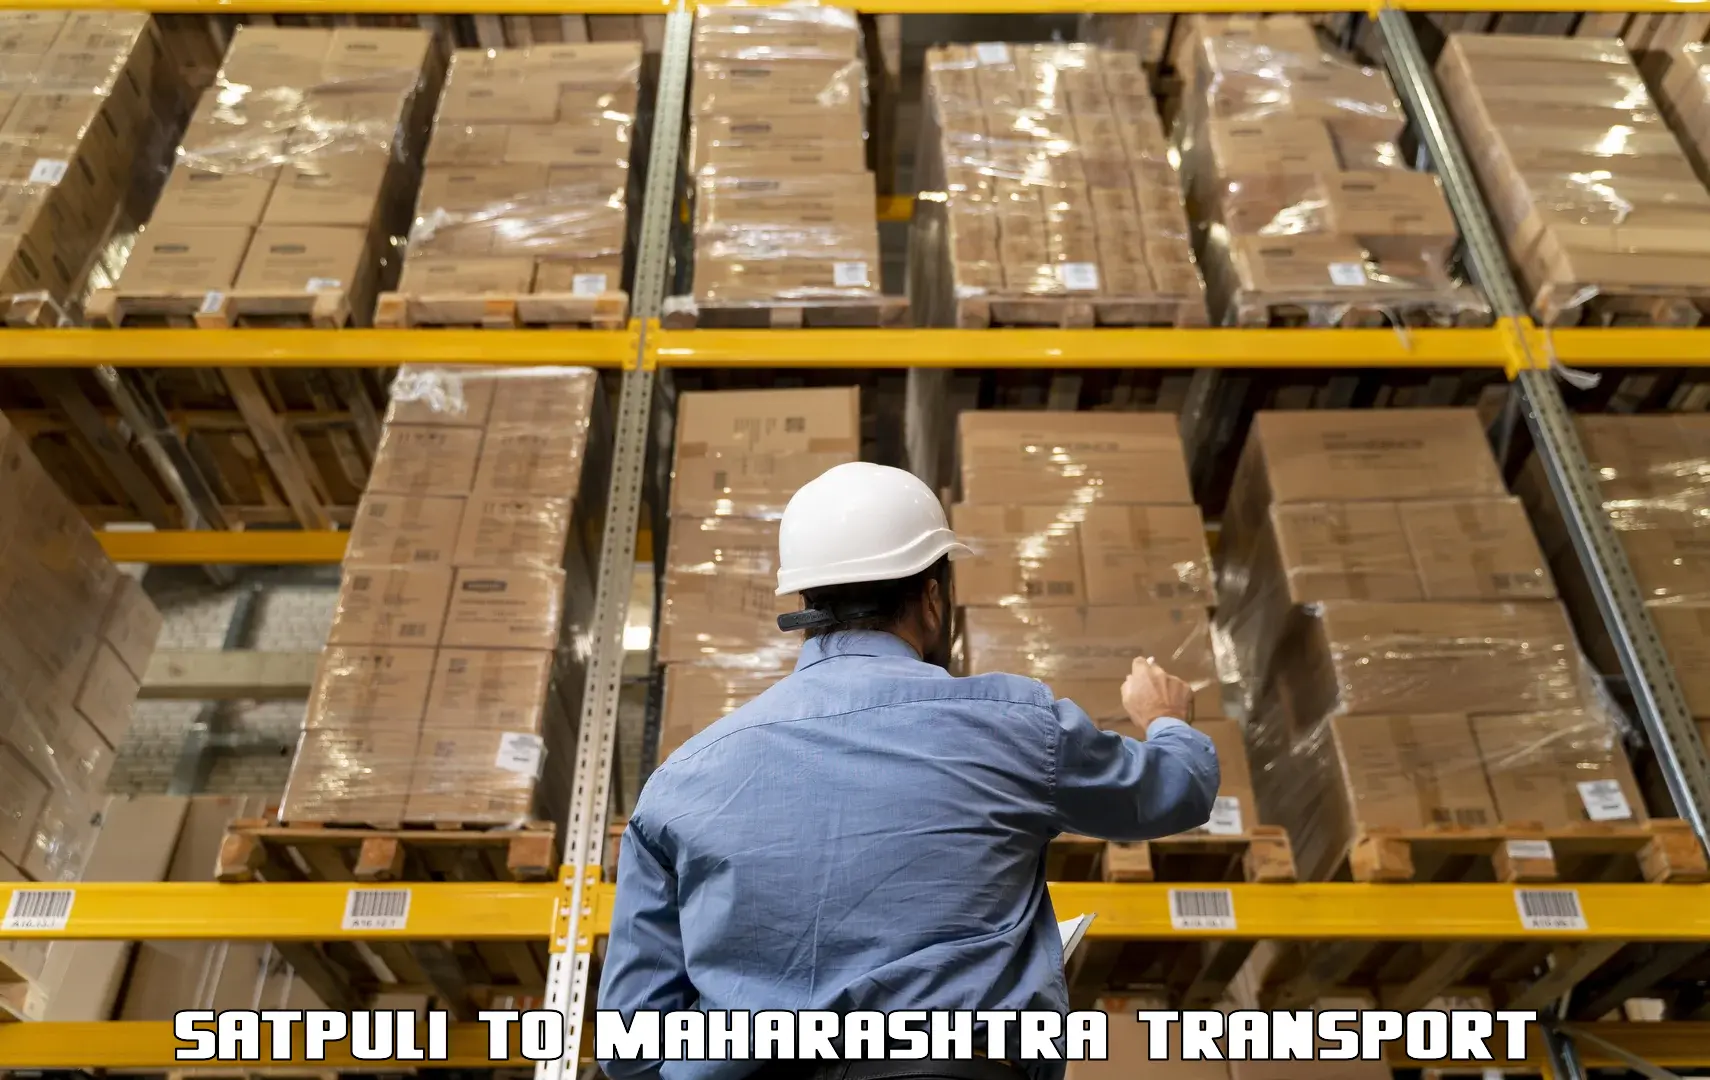 Transport bike from one state to another Satpuli to Mumbai Port